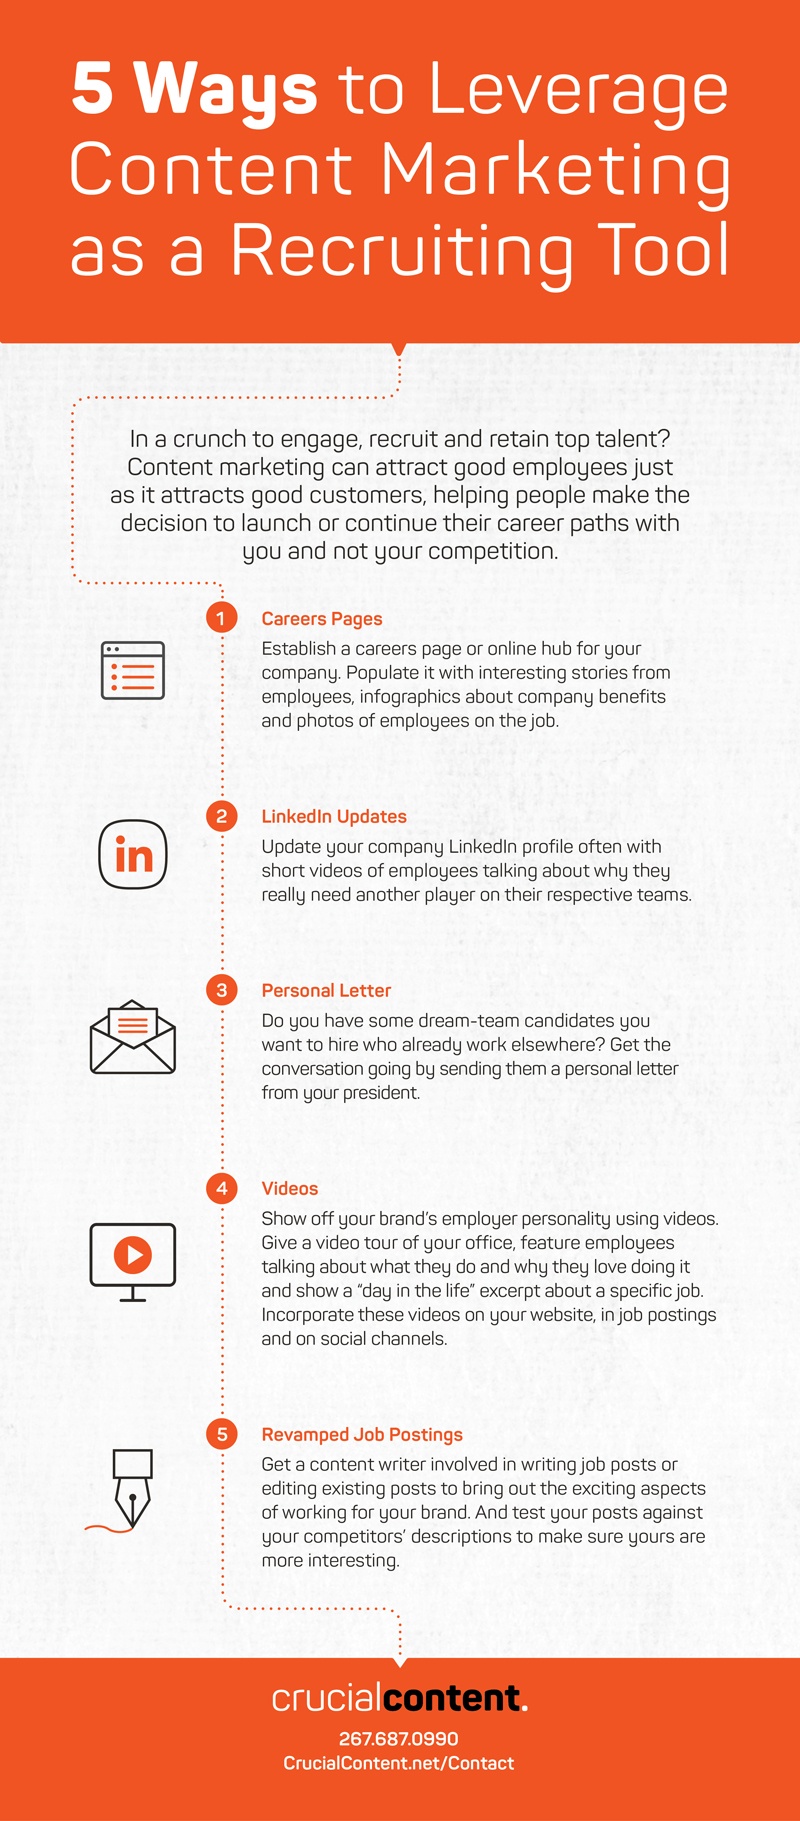 5 Ways to Leverage Content Marketing as a Recruiting Tool infographic